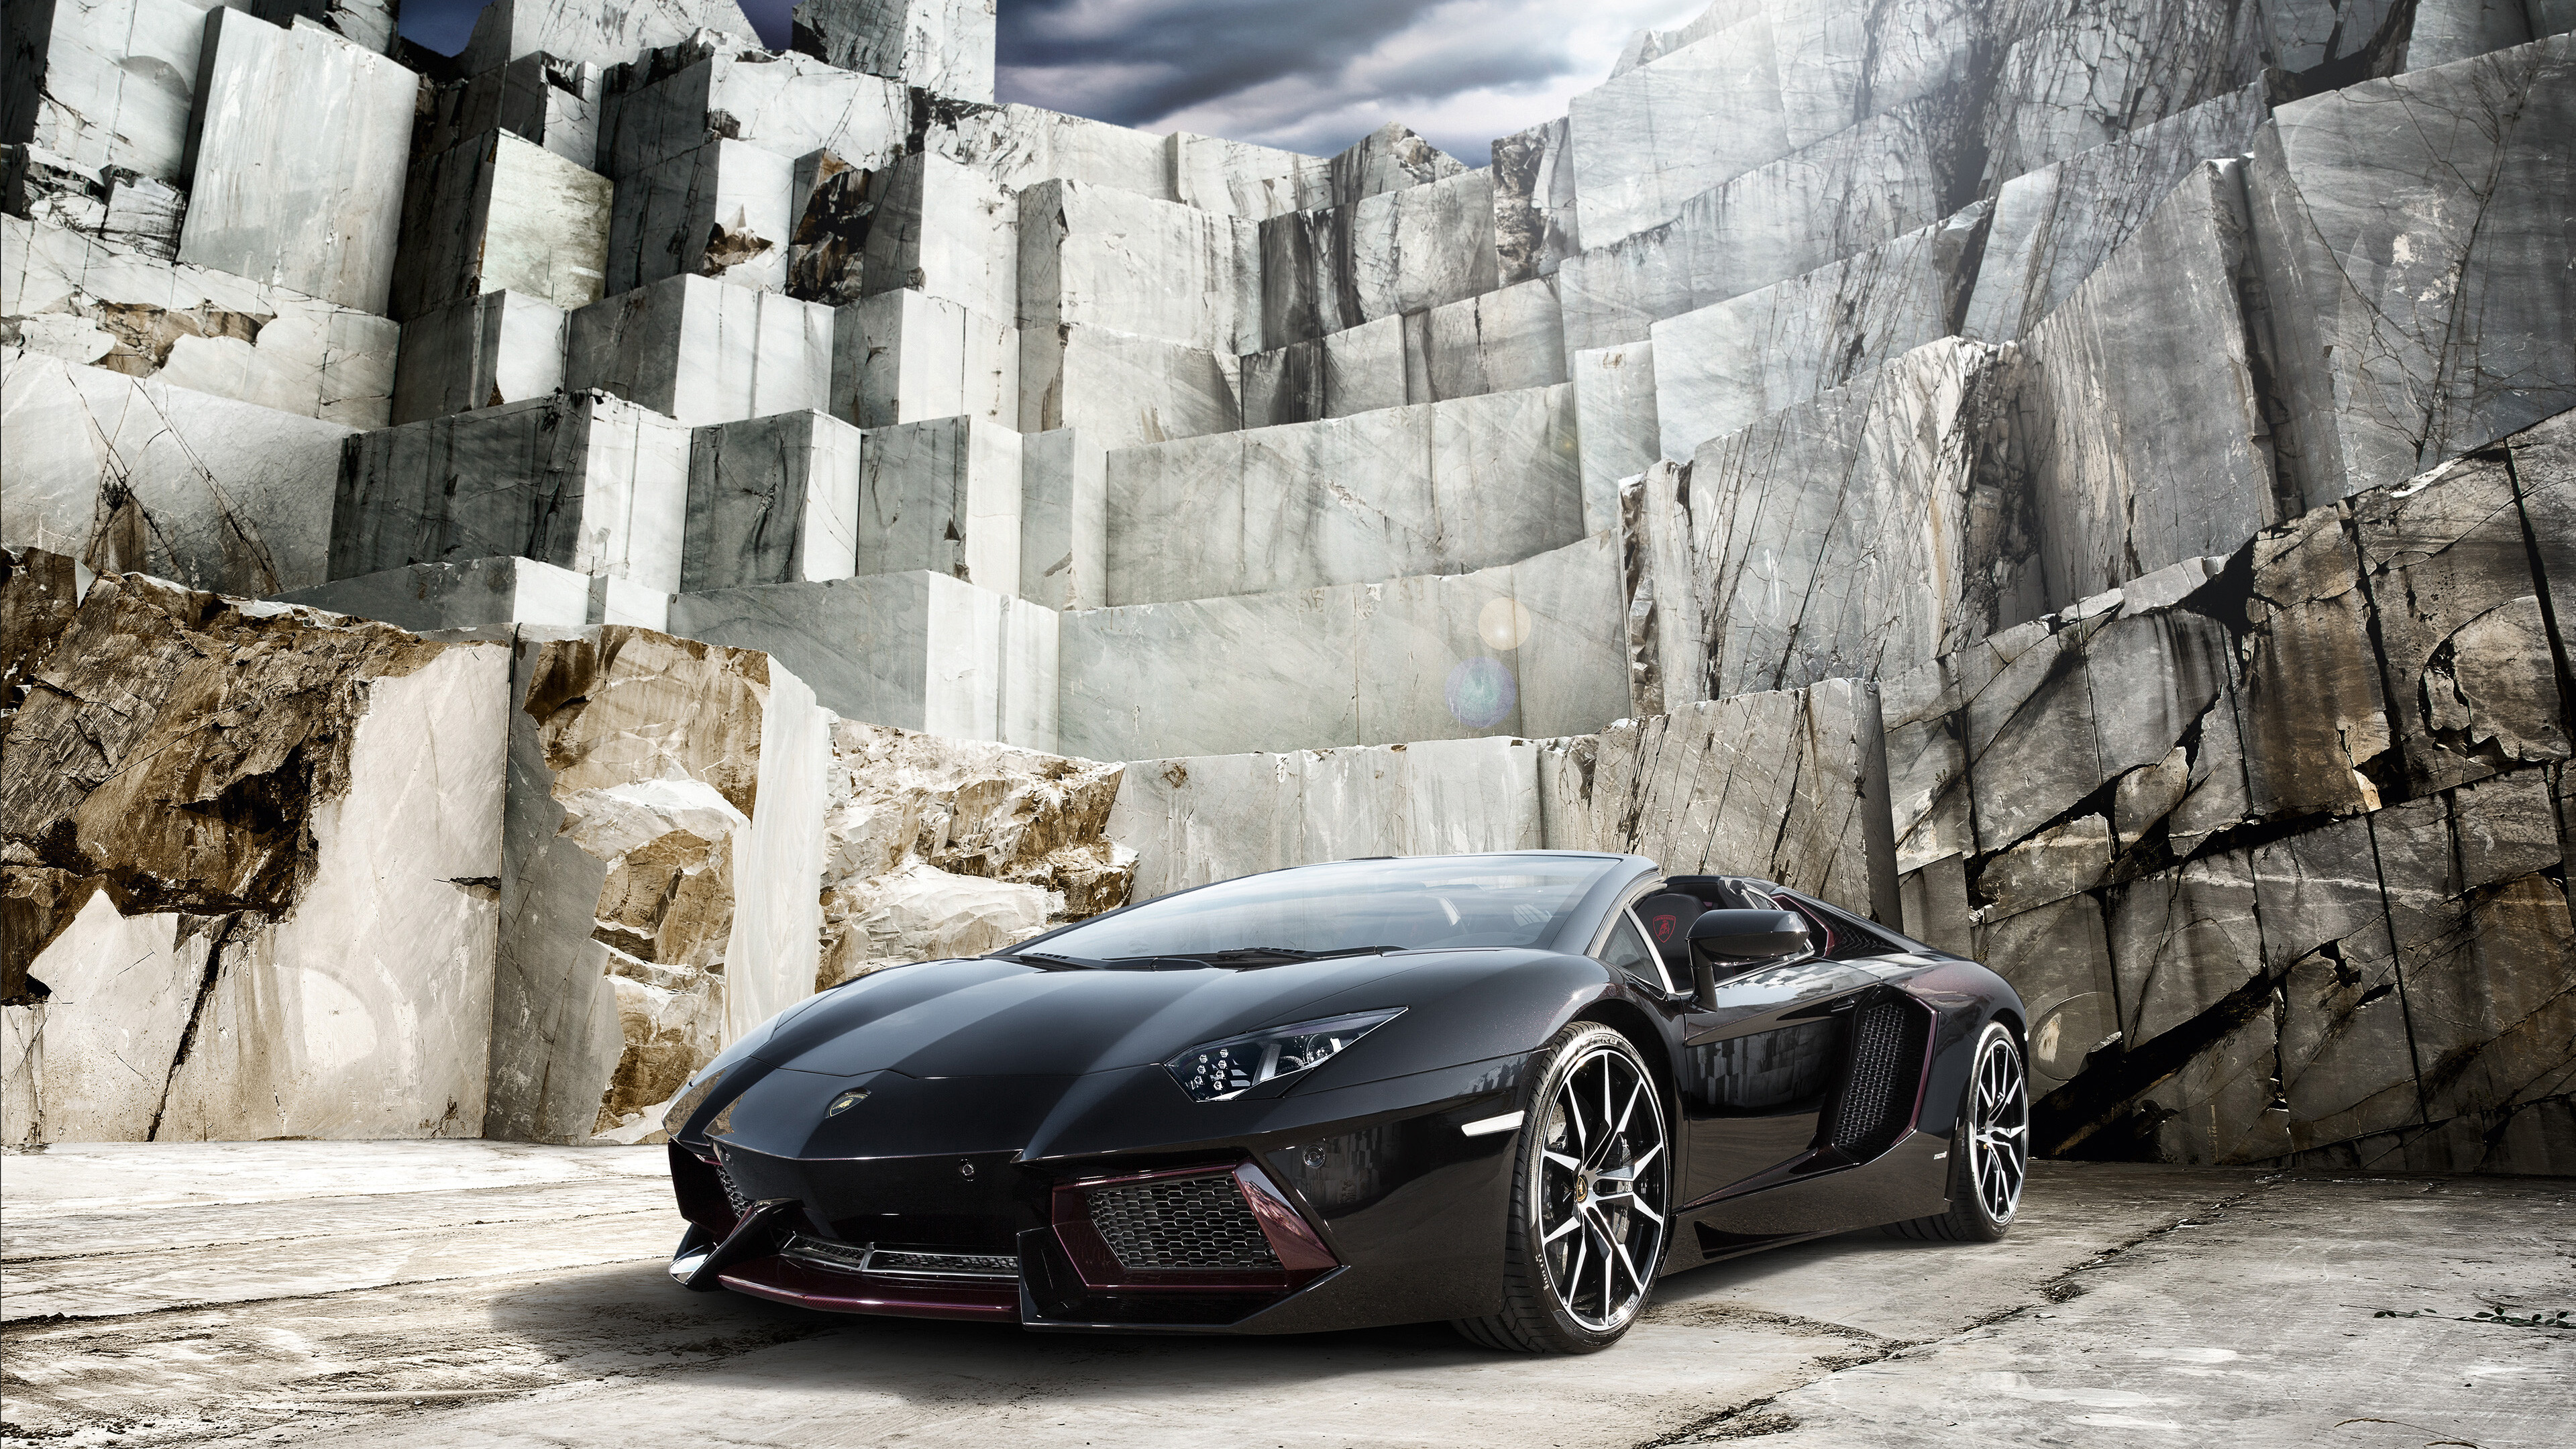 Lamborghini: Aventador, Cars, The company was bought by the Chrysler Corporation in 1987. 3840x2160 4K Wallpaper.